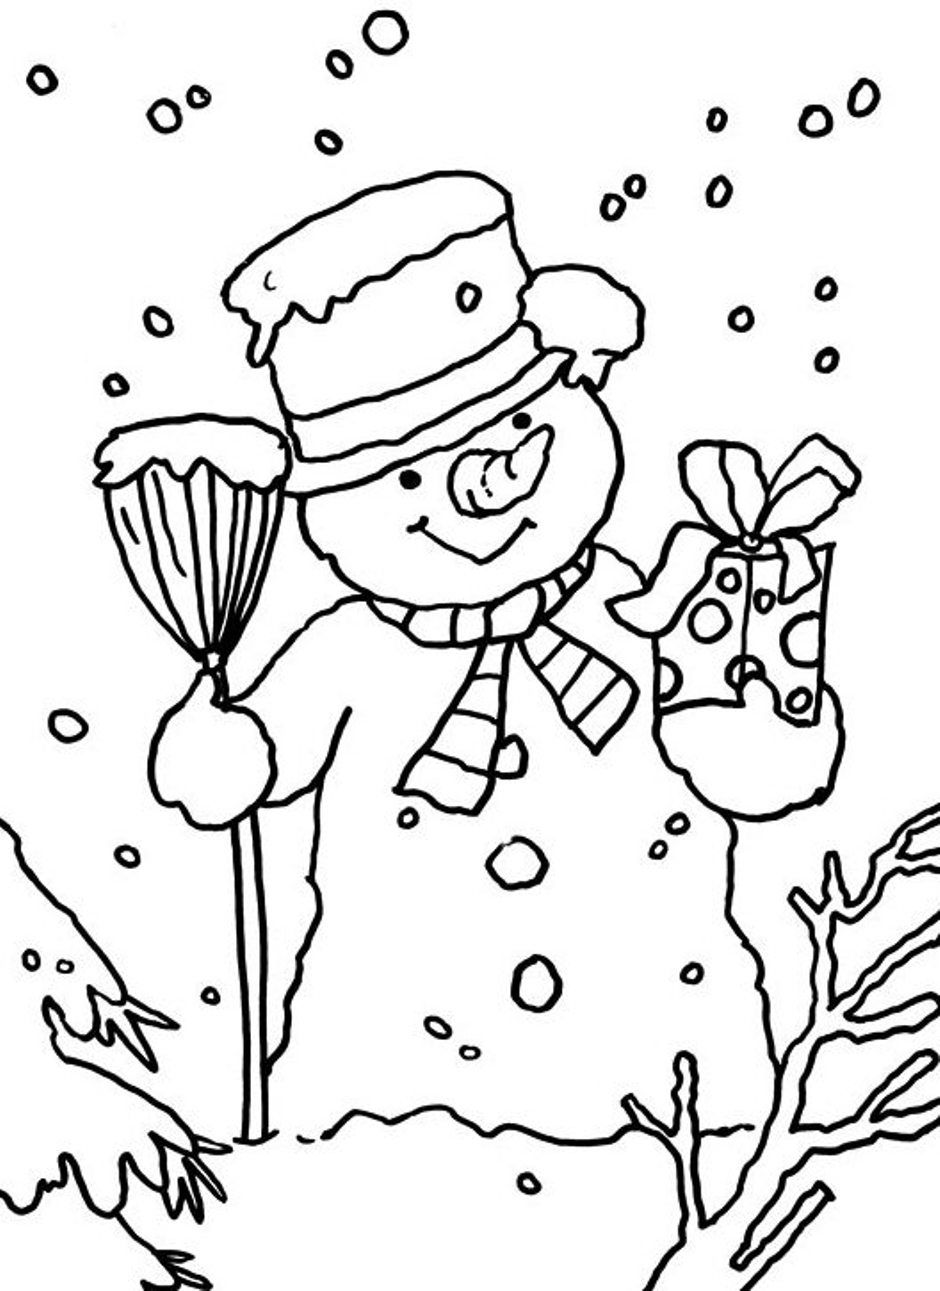 Free Winter Coloring Pages Snowman Printable | Winter Coloring ...